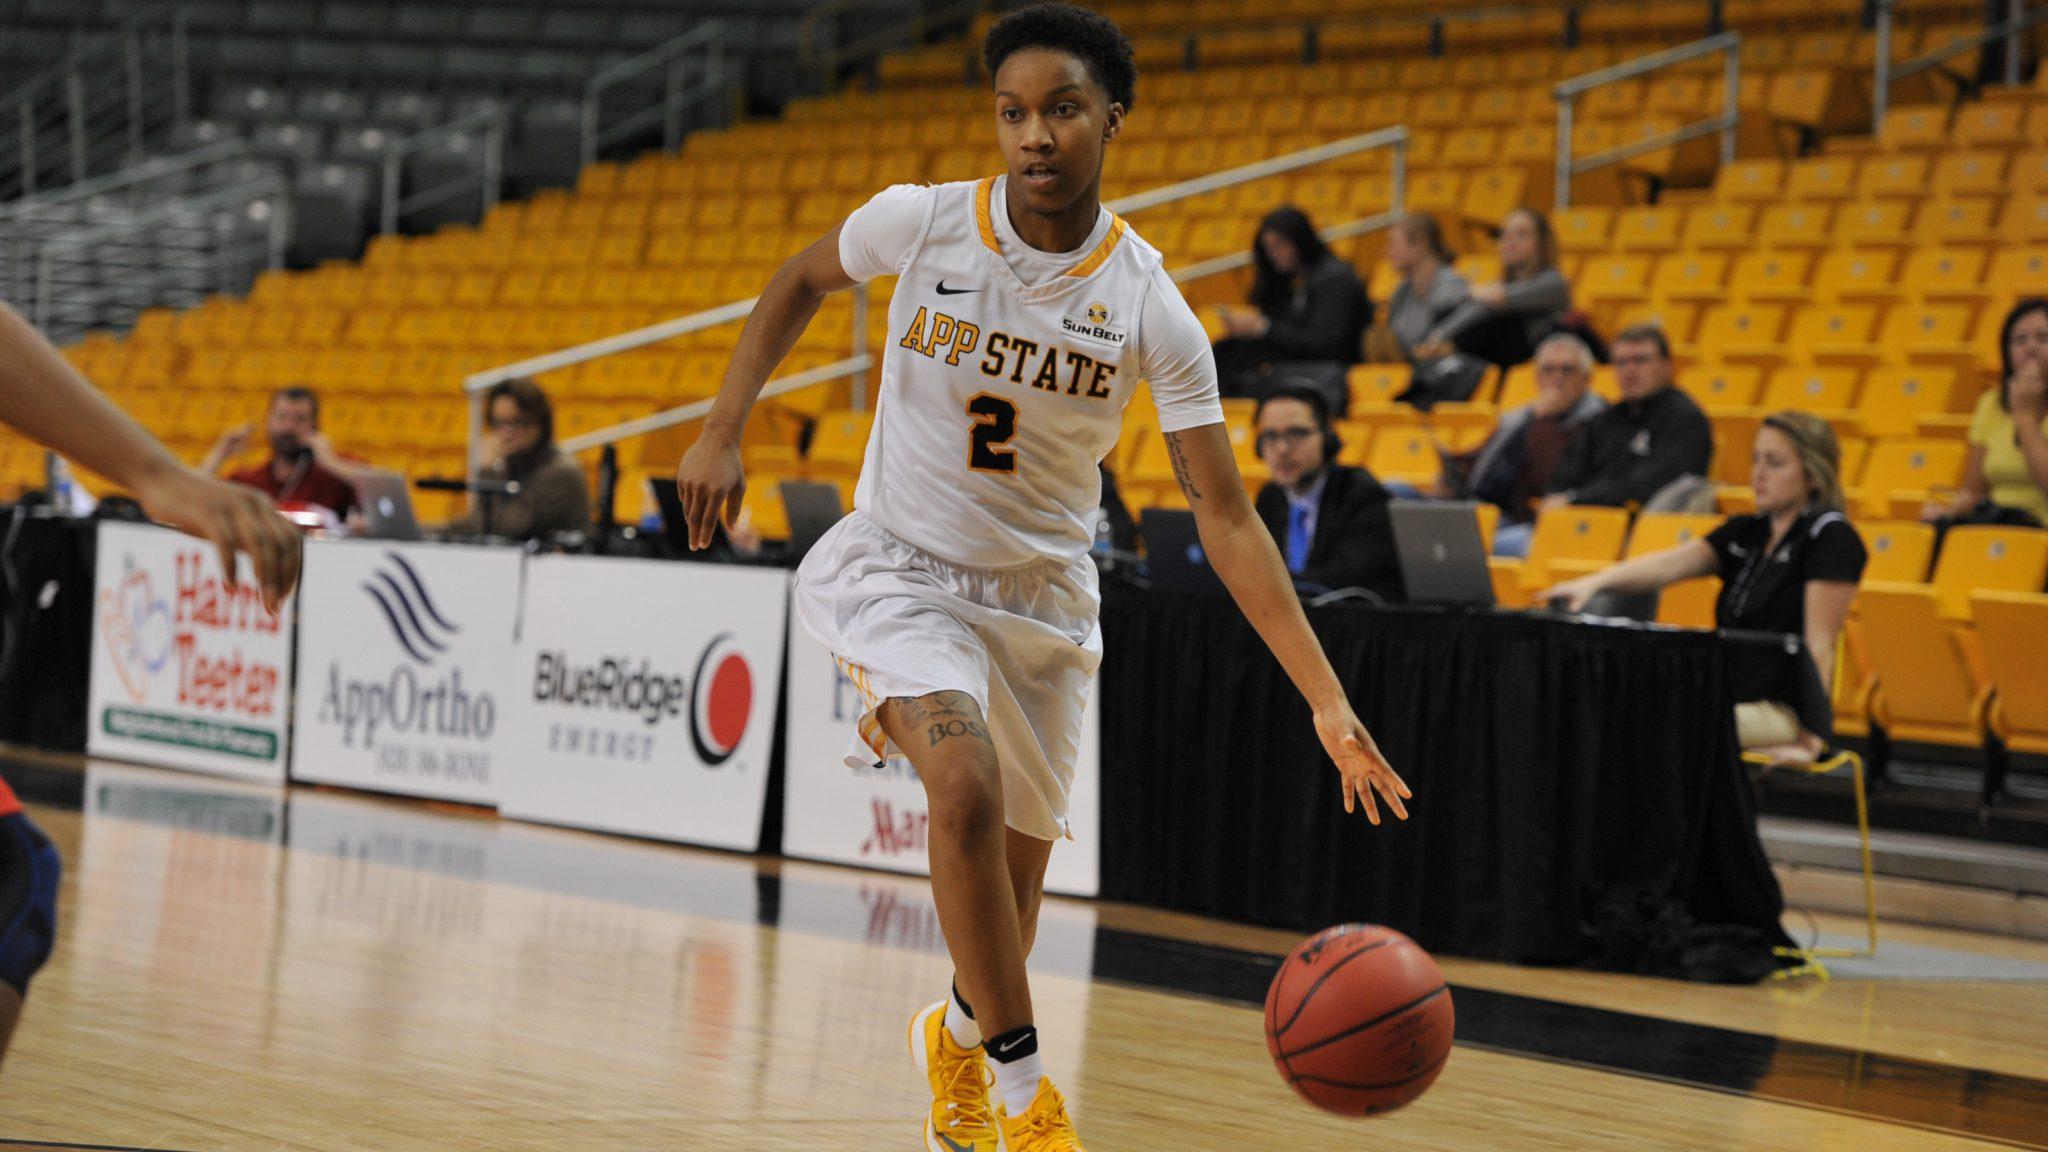 Guard Q Murray scored 11 fourth quarter points as the Mountaineers attempted to comeback.
Photo courtesy: App State Athletics/Dave Mayo